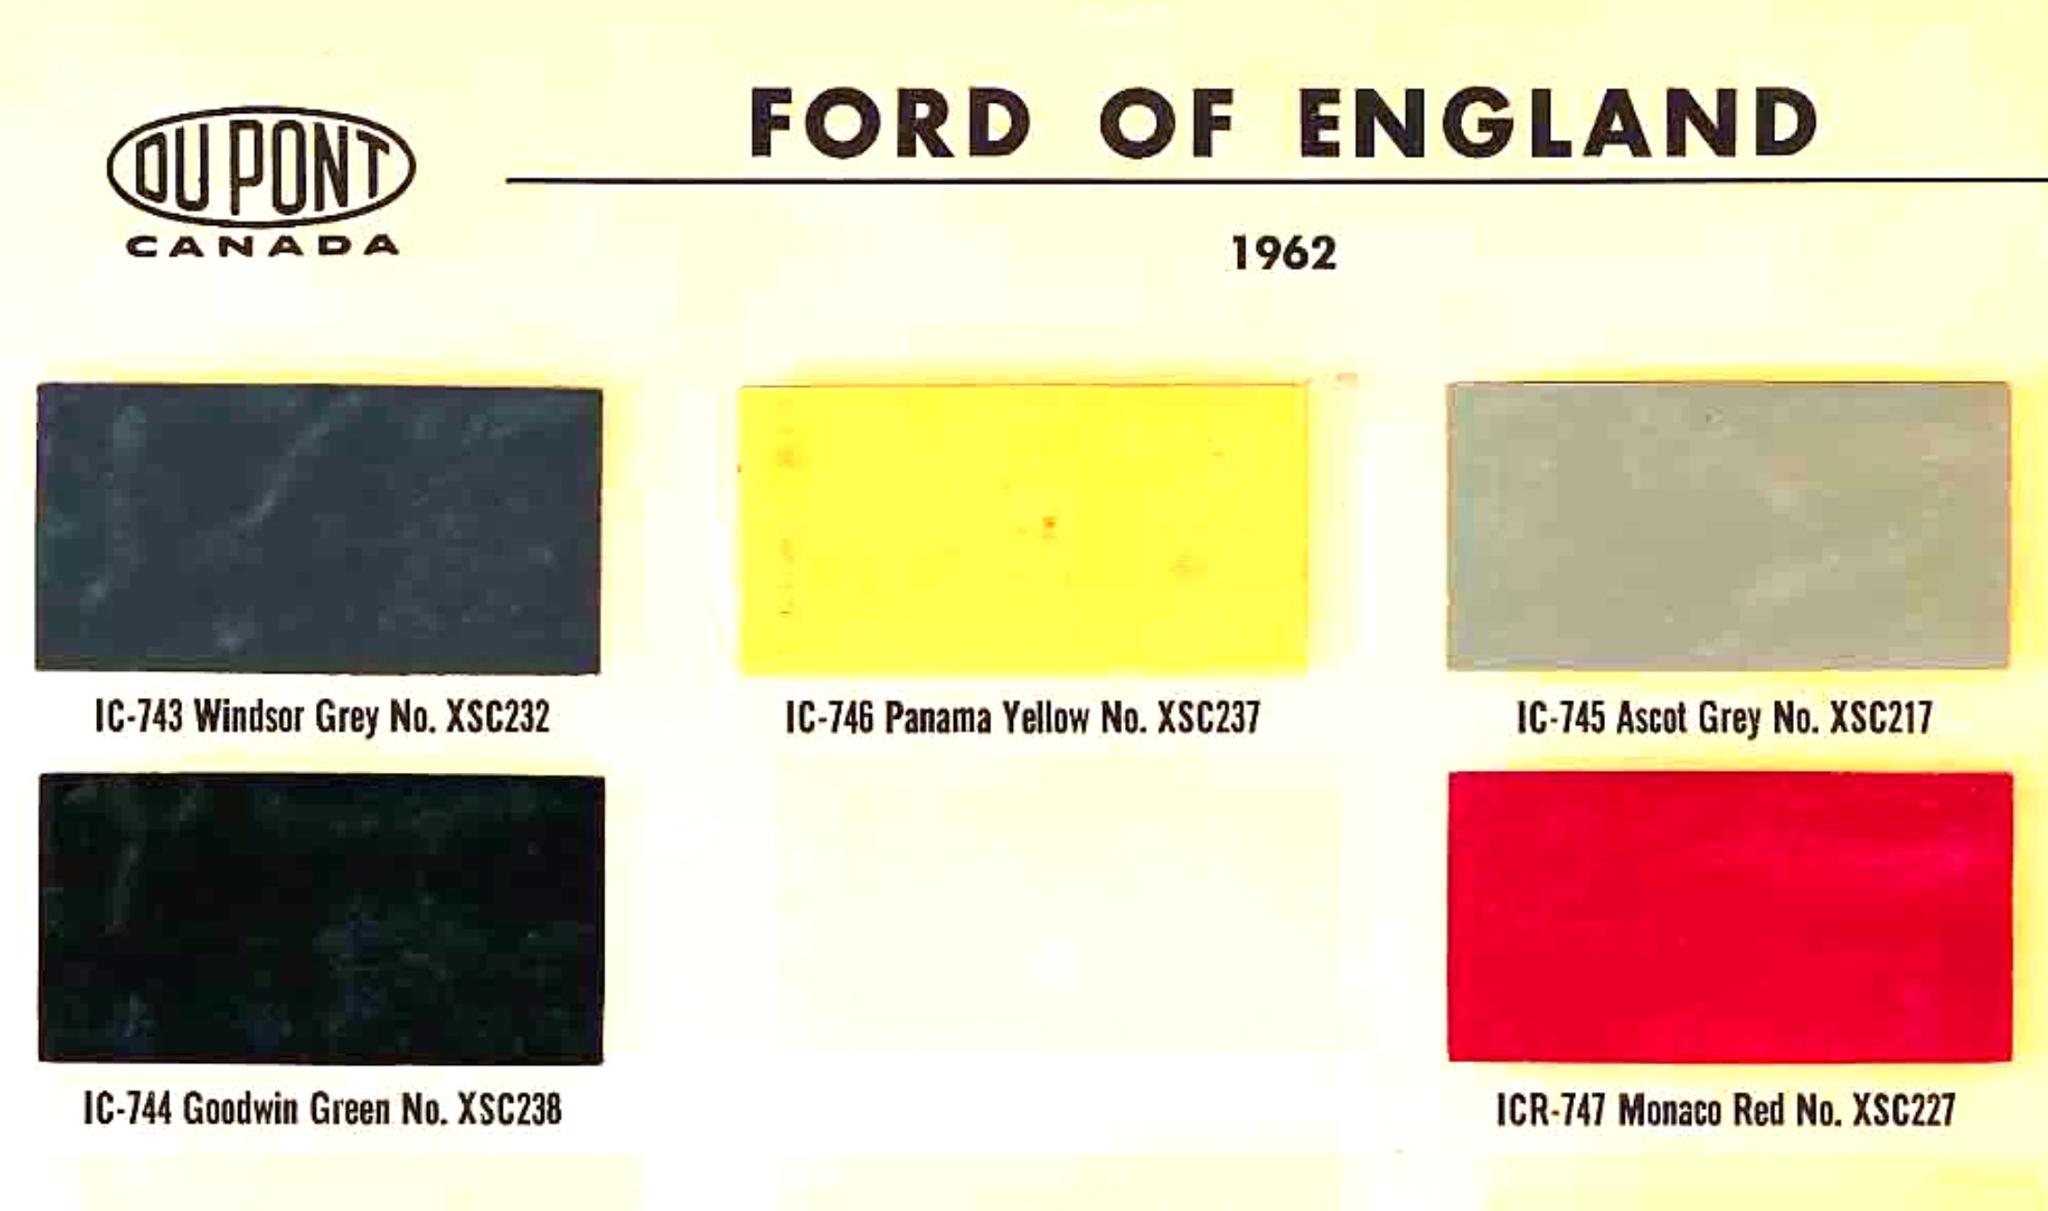 Color examples, Ordering Codes, OEM Paint Code, Color Swatches, and Color Names for the Ford Motor Company in 1962